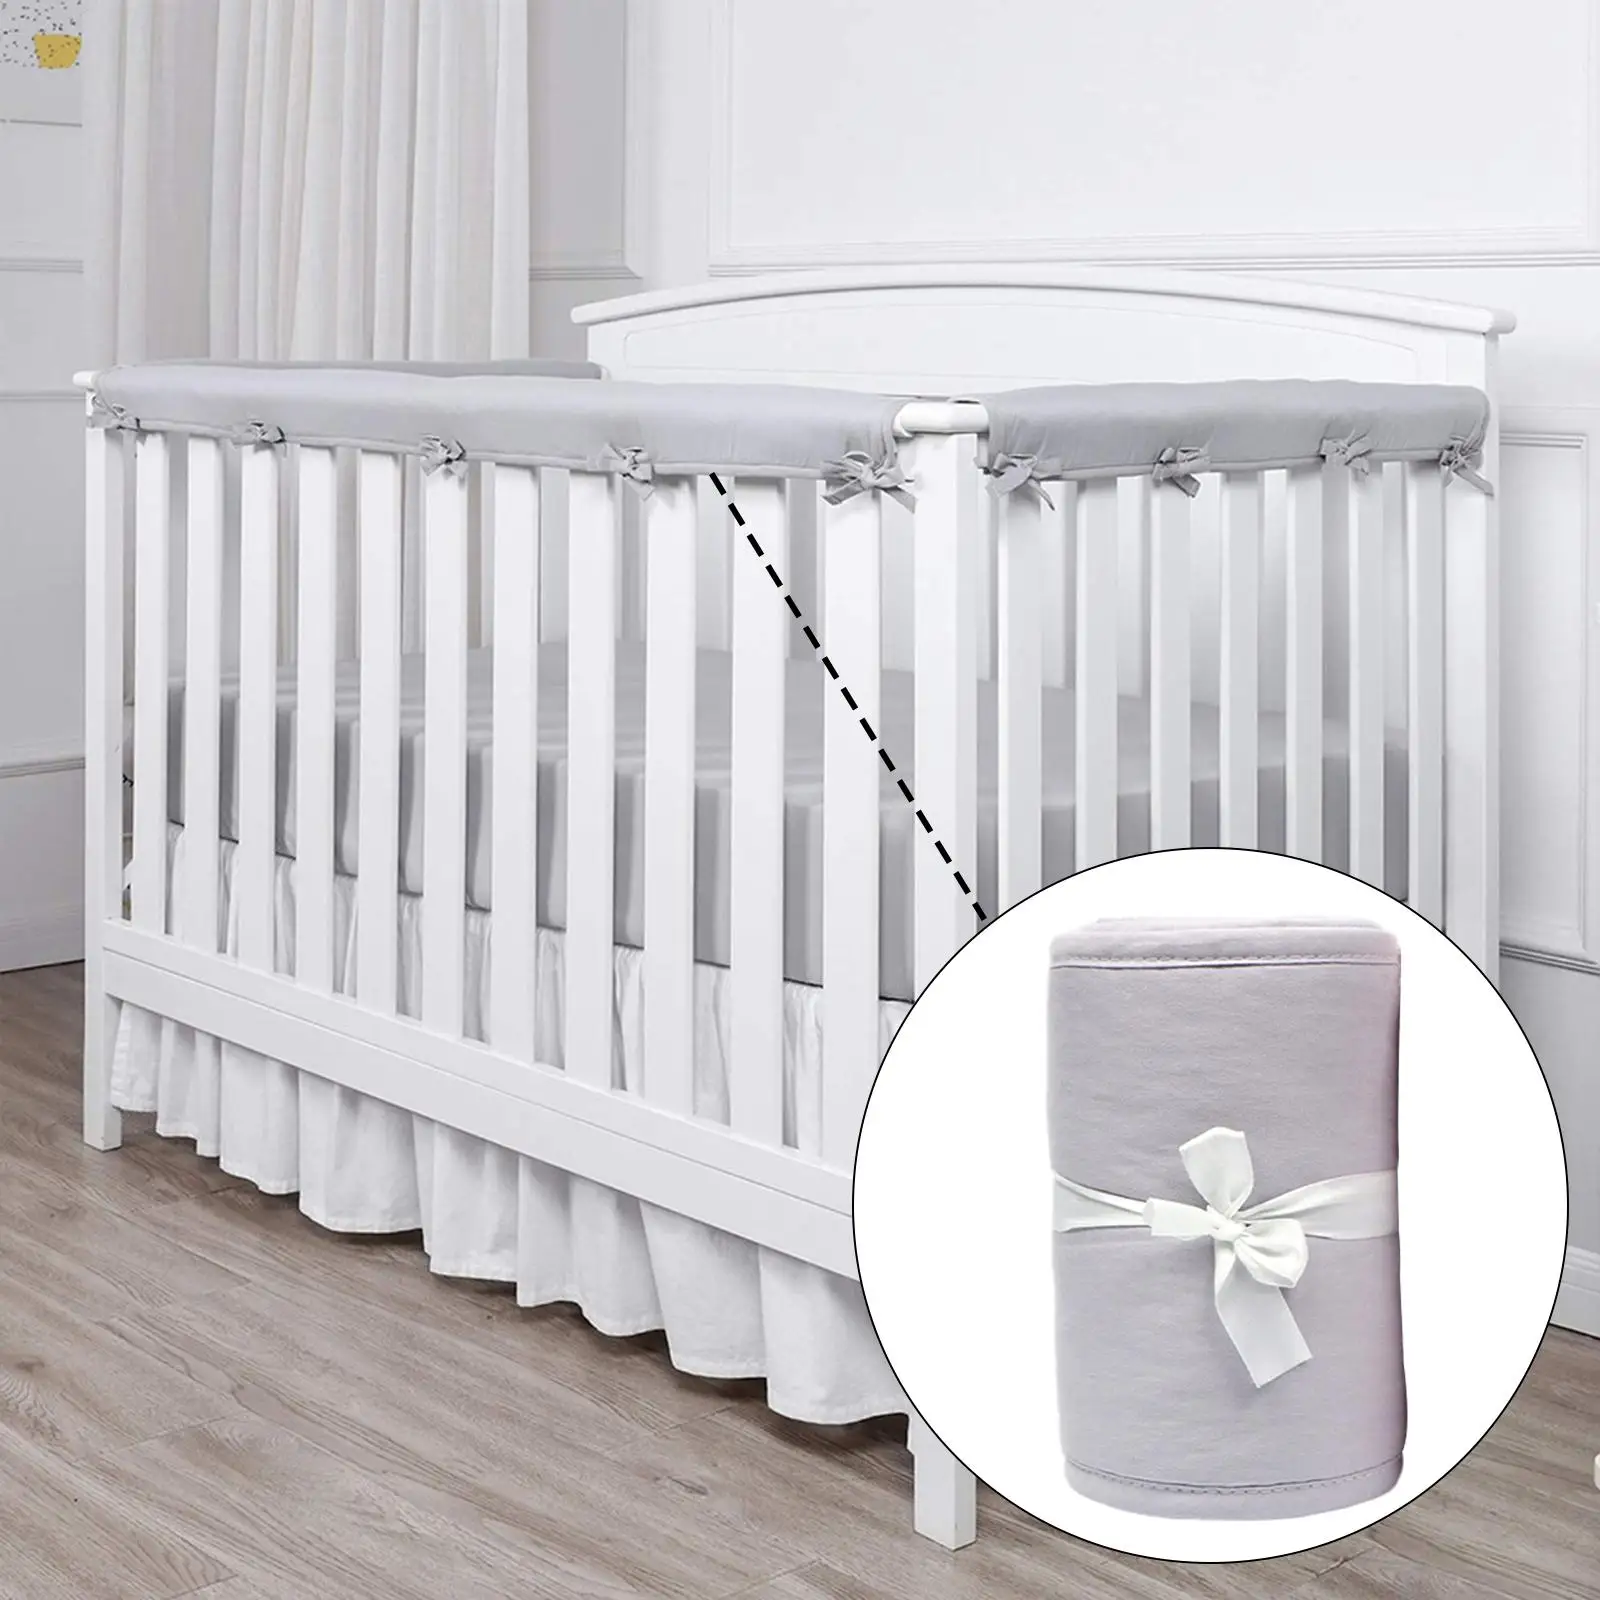 3 Pieces Baby Crib Rail Cover Baby Safety Products Cotton for Fence Infants